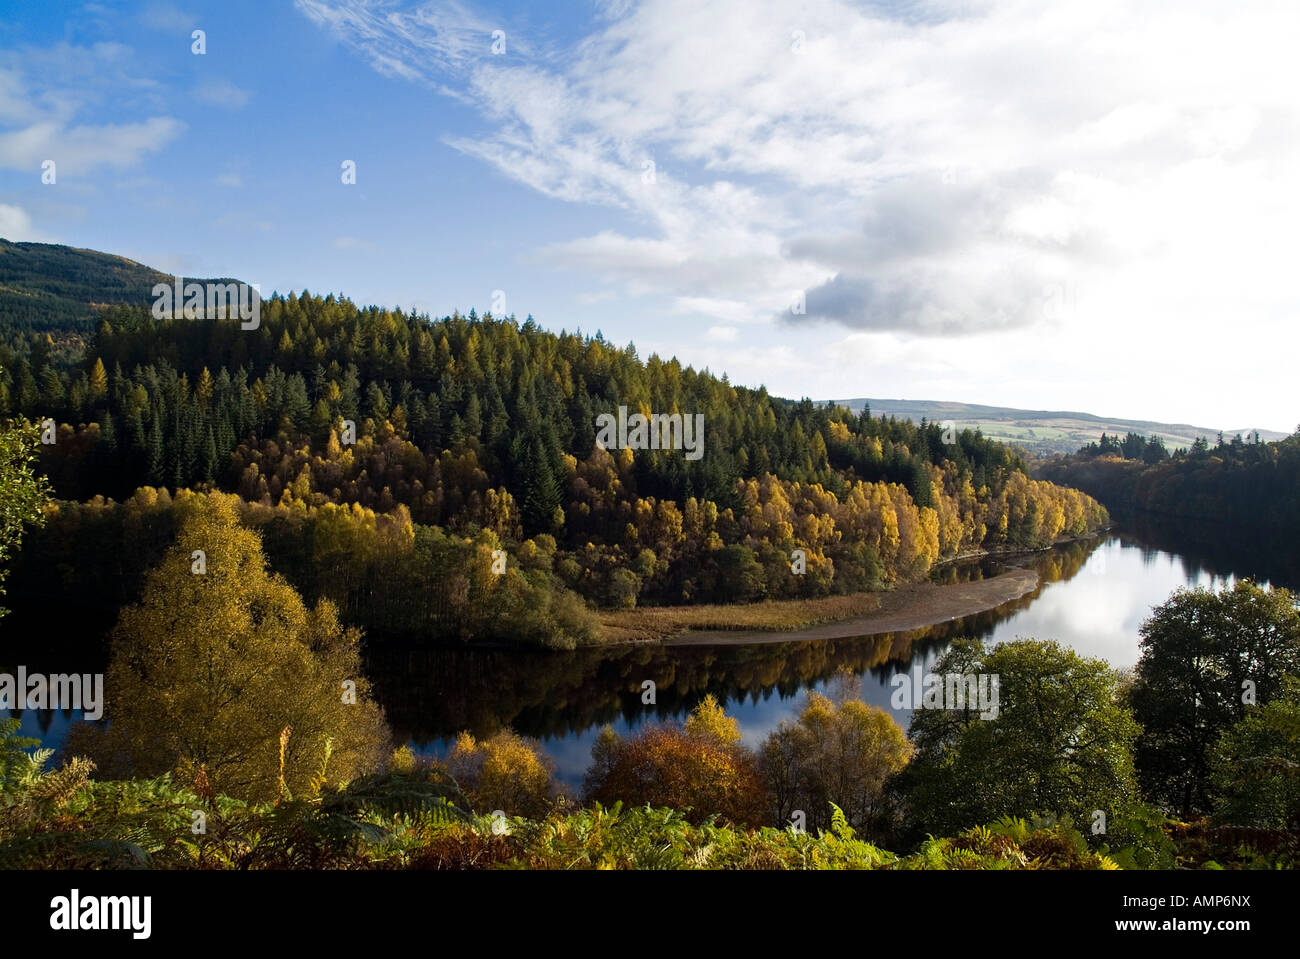 dh Scottish highlands LOCH FASKALLY PERTHSHIRE Scenic Autumn trees beautiful uk landscape forest tranquil country autumn Scotland glen lochs woods Stock Photo